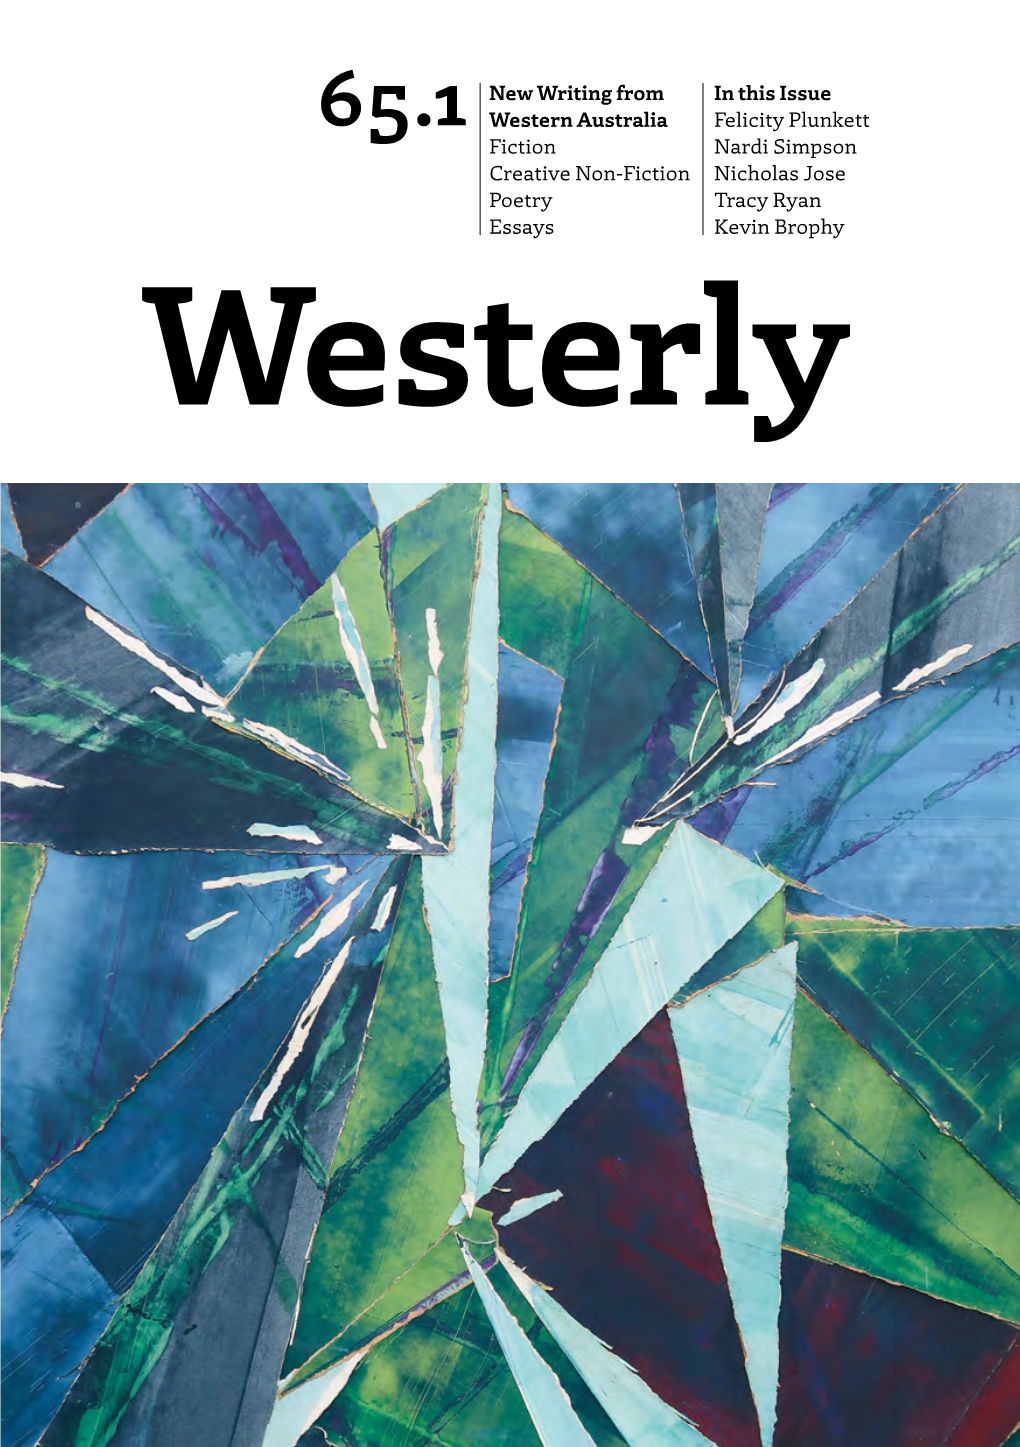 Westerly 65.1 9 | Catherine Noske One for Sorrow Felicity Is a Poet and Critic